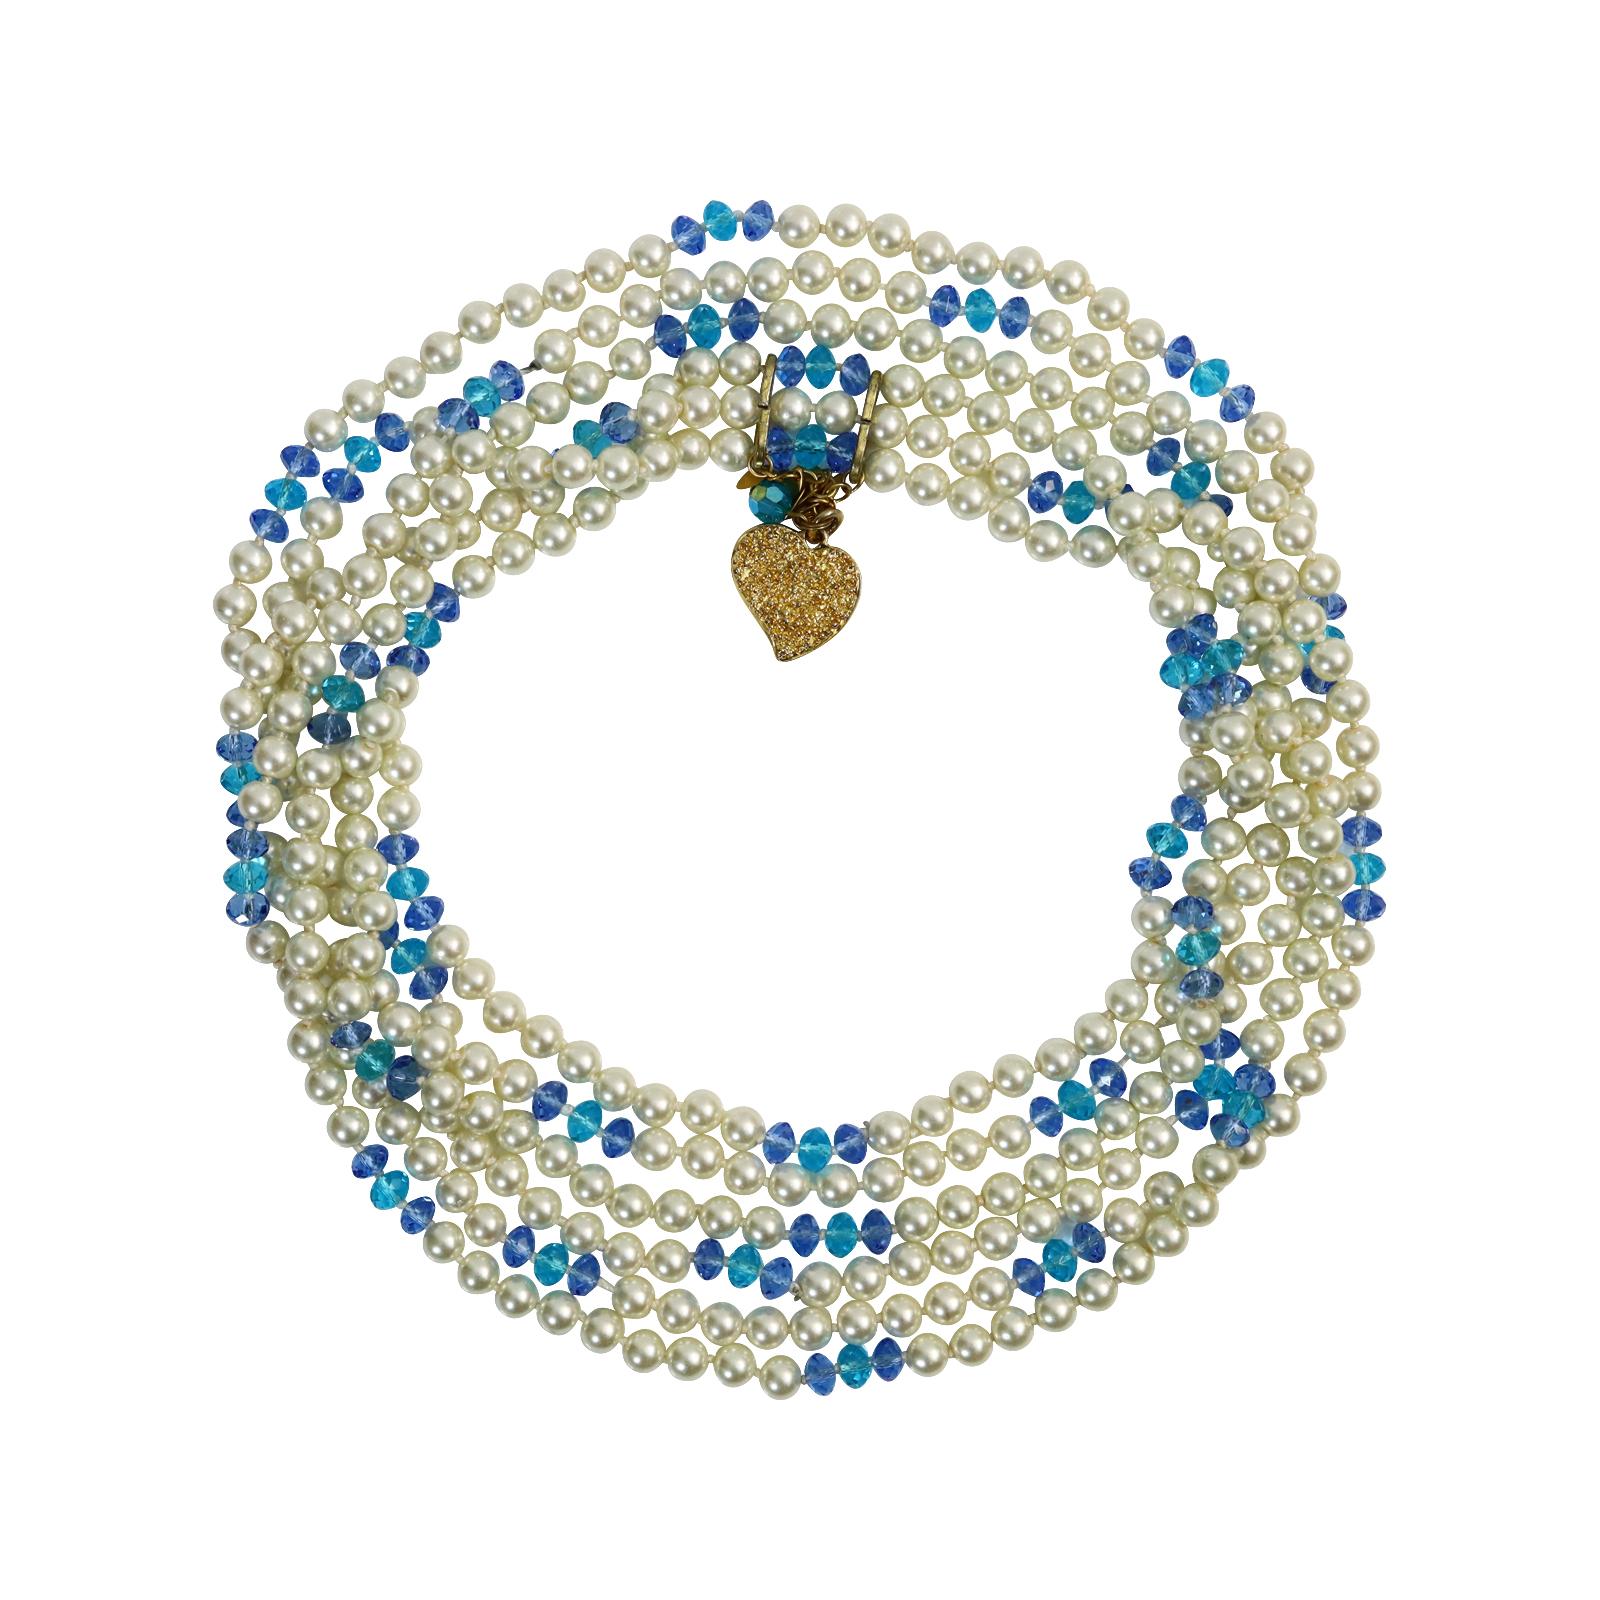 Vintage Yves Saint Laurent YSL 3 Strand Pearl and Blue Bead Necklace Circa 1990s For Sale 3